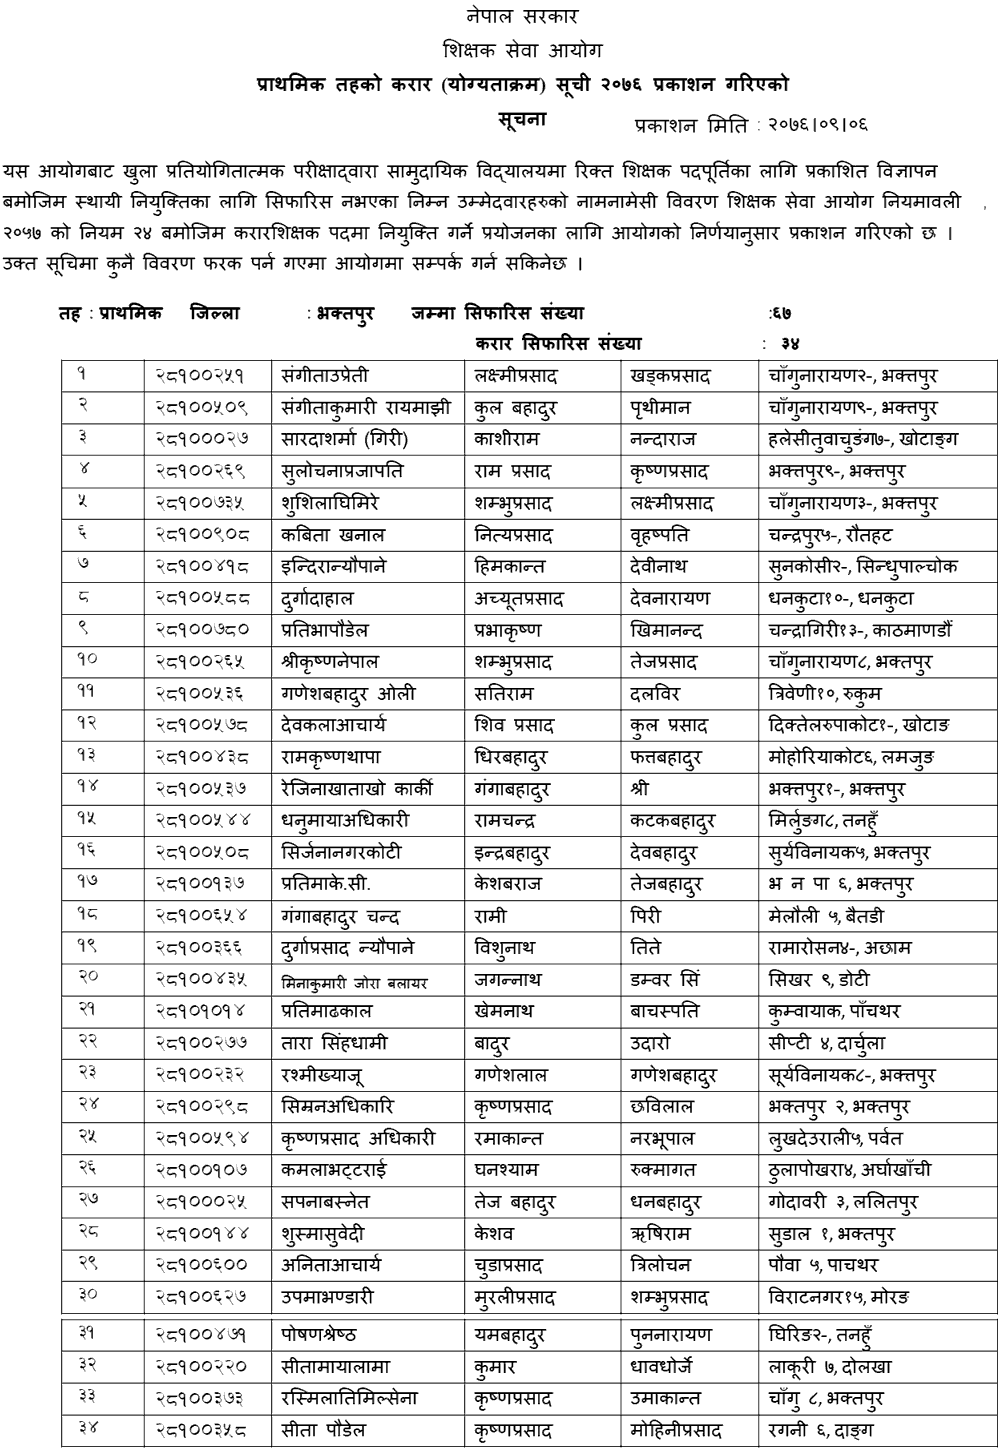 TSC Published Primary Level Contract List of Dang, Gorkha, Bhaktapur and Panchthar